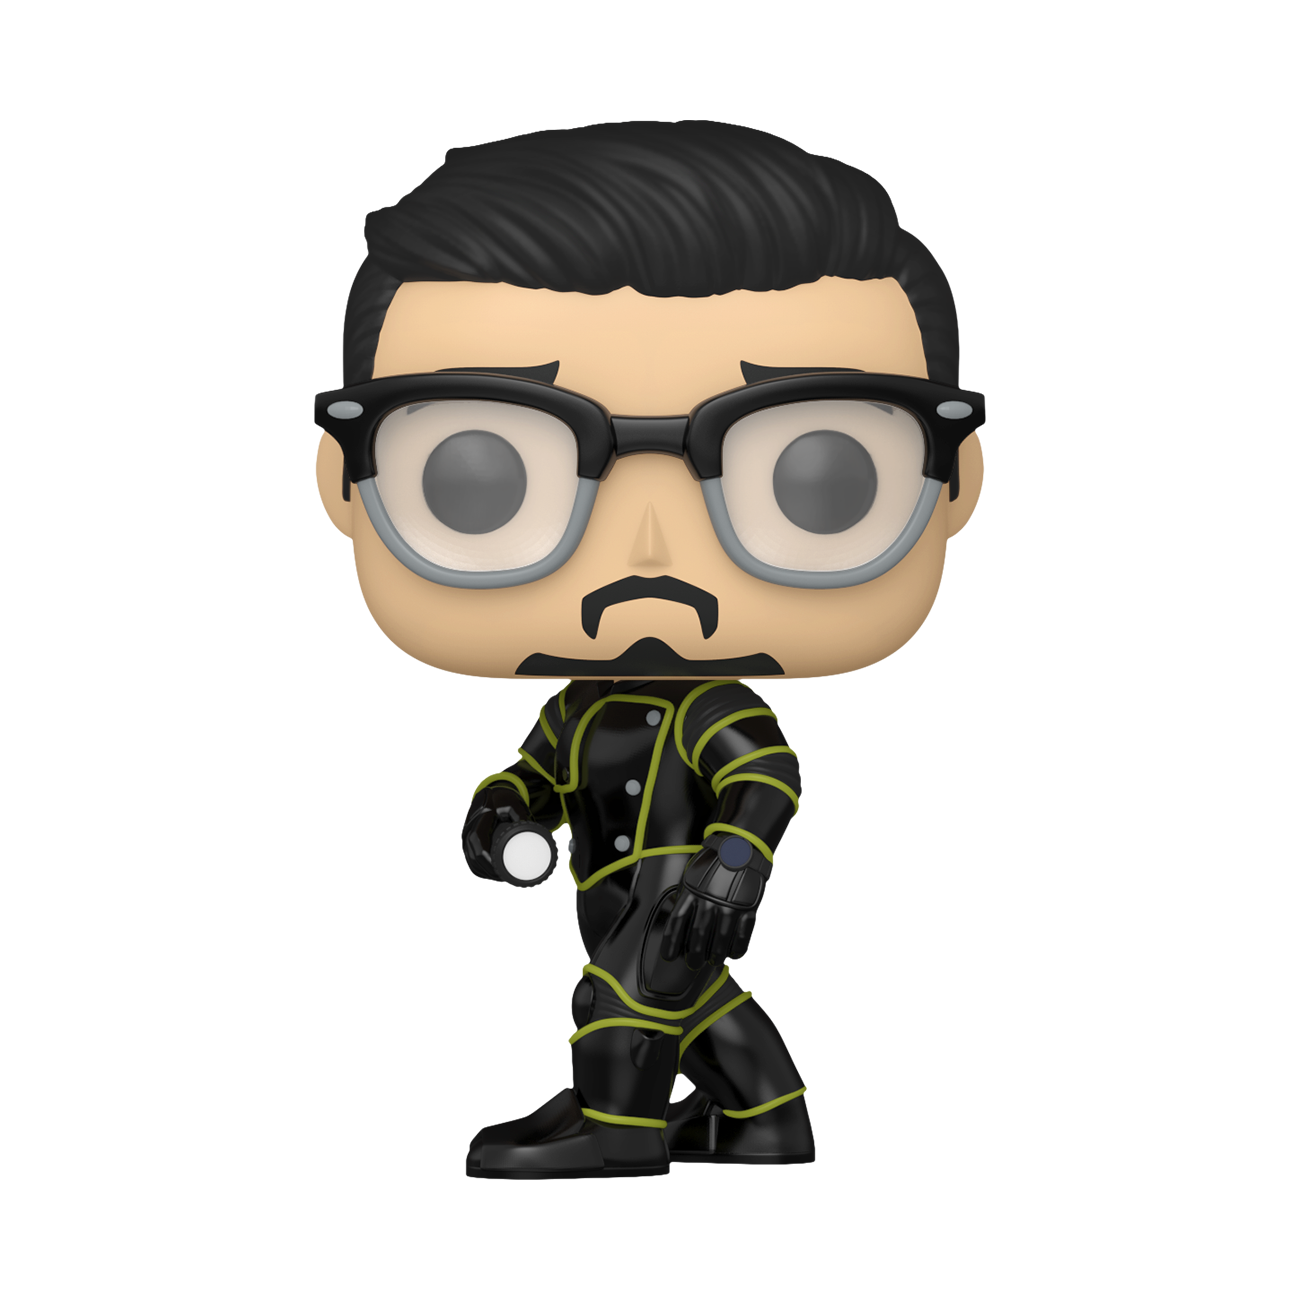 Photos - Action Figures / Transformers Funko POP! Dr. Shin - Aquaman And The Lost Kingdom 